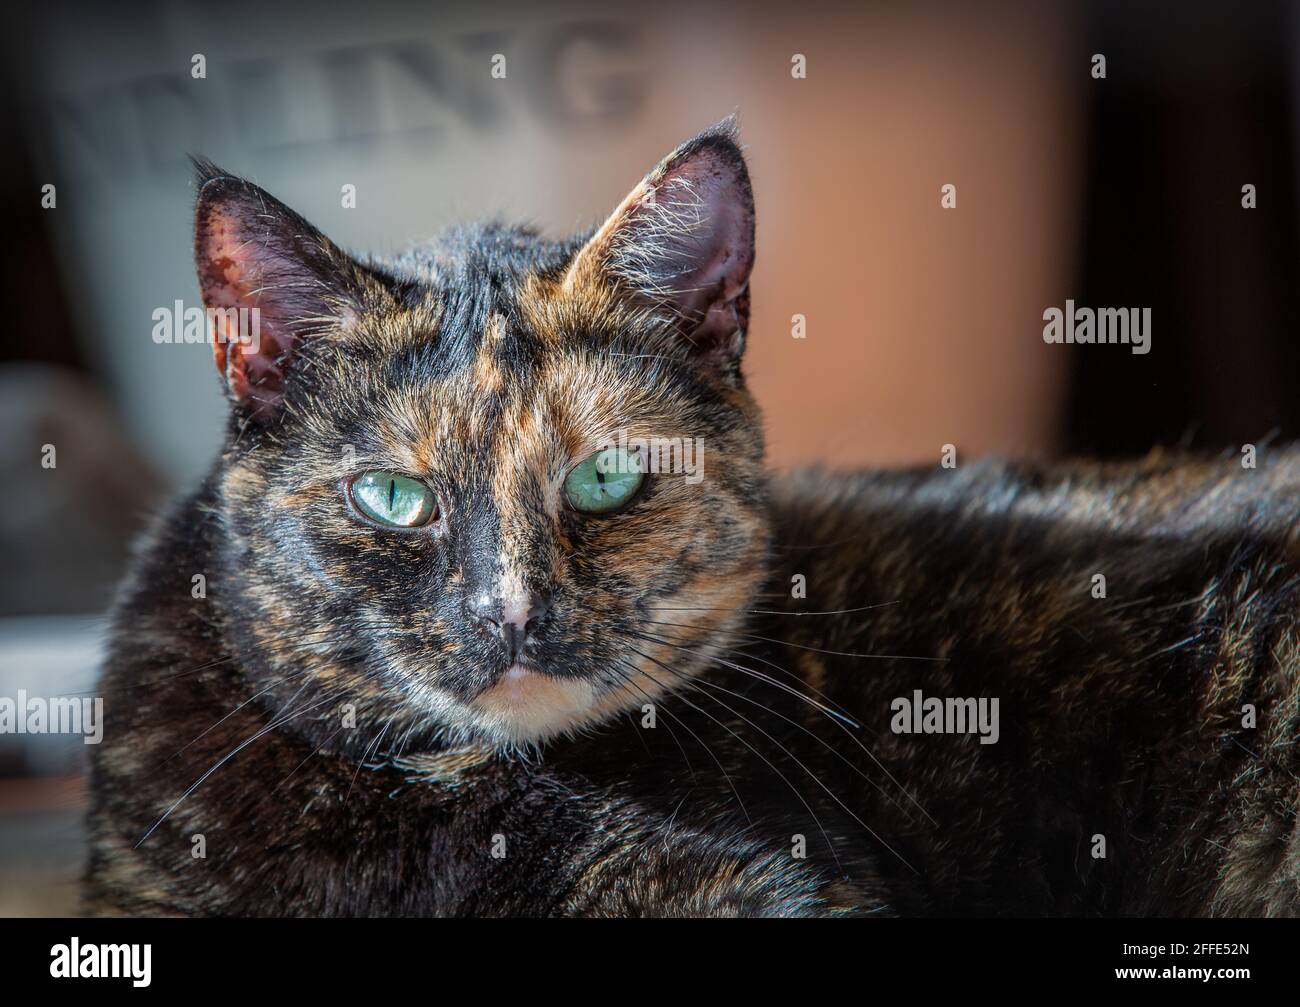 Domestic pet cat head shot with kindling bucket out of focus in background Stock Photo